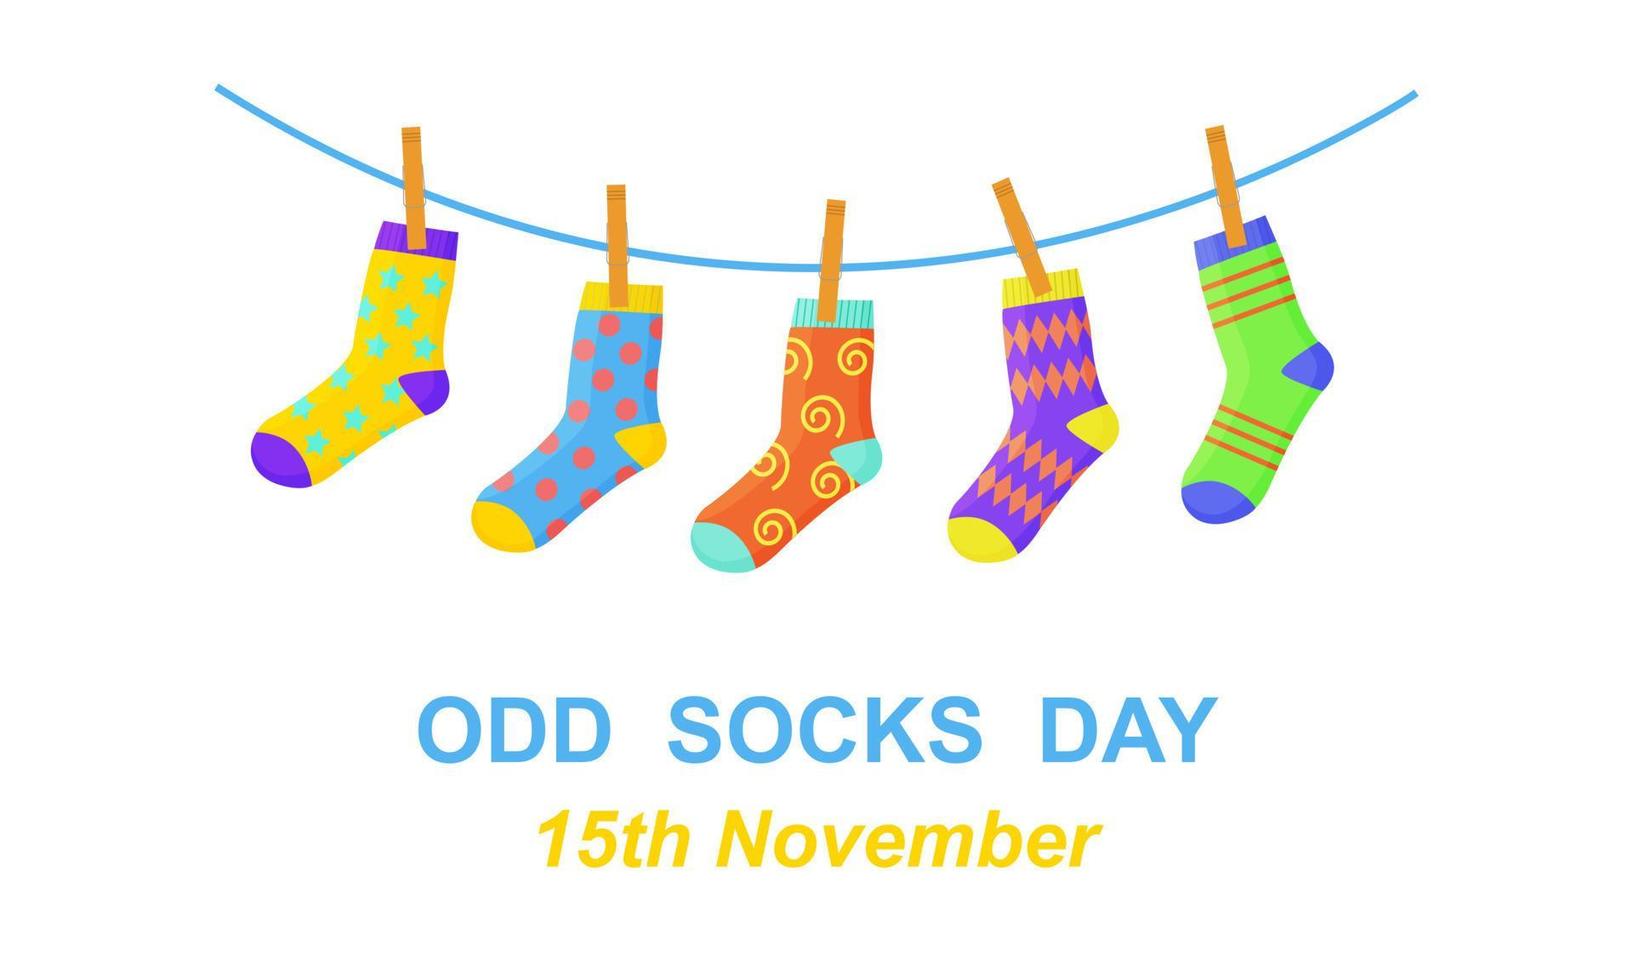 Odd socks day banner. Different colorful odd socks hanging on the rope vector